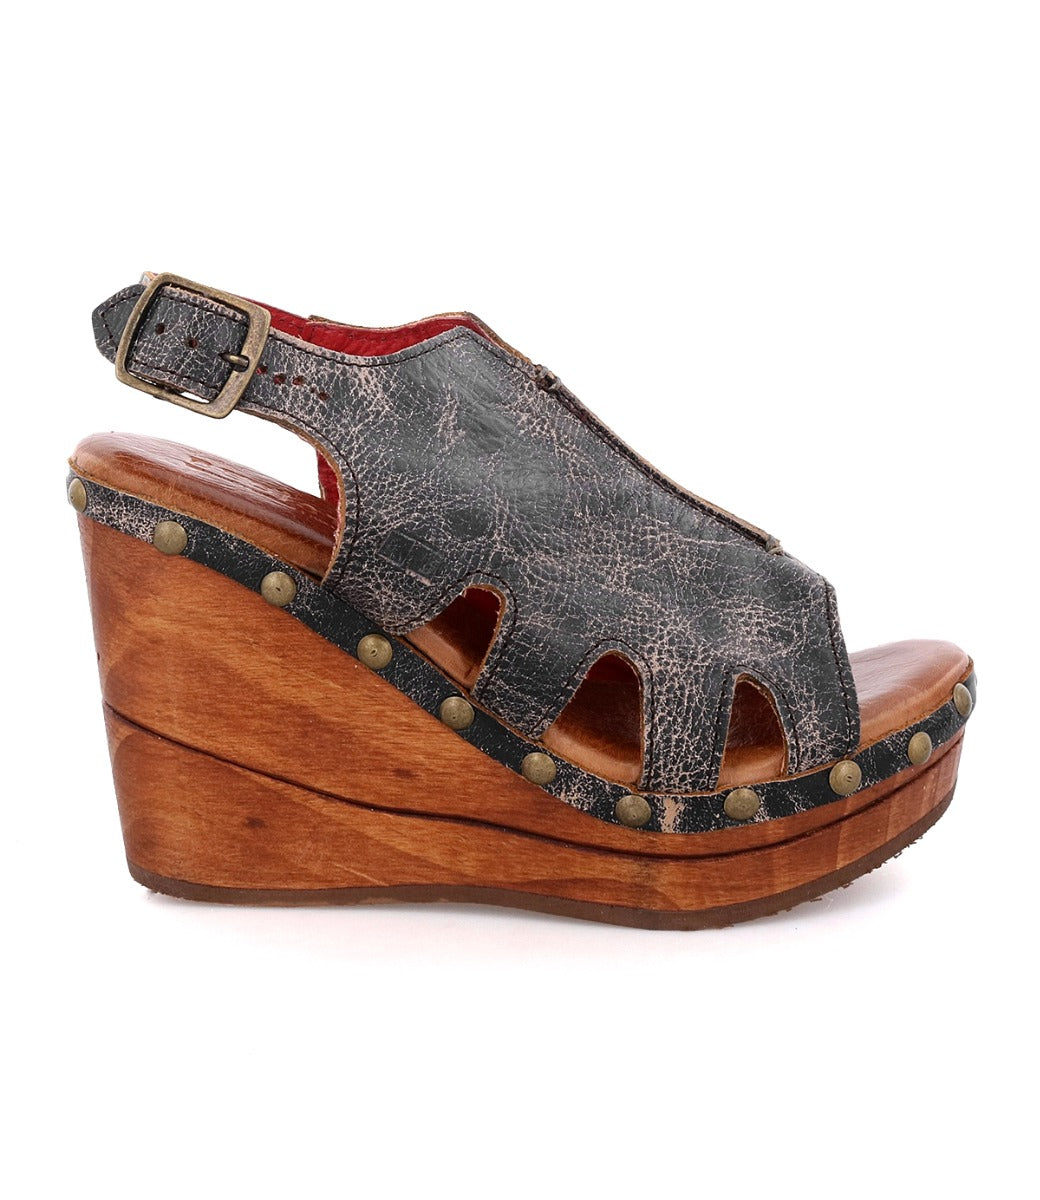 A women's wedge sandal with a wooden platform and straps called Naiya by Bed Stu.